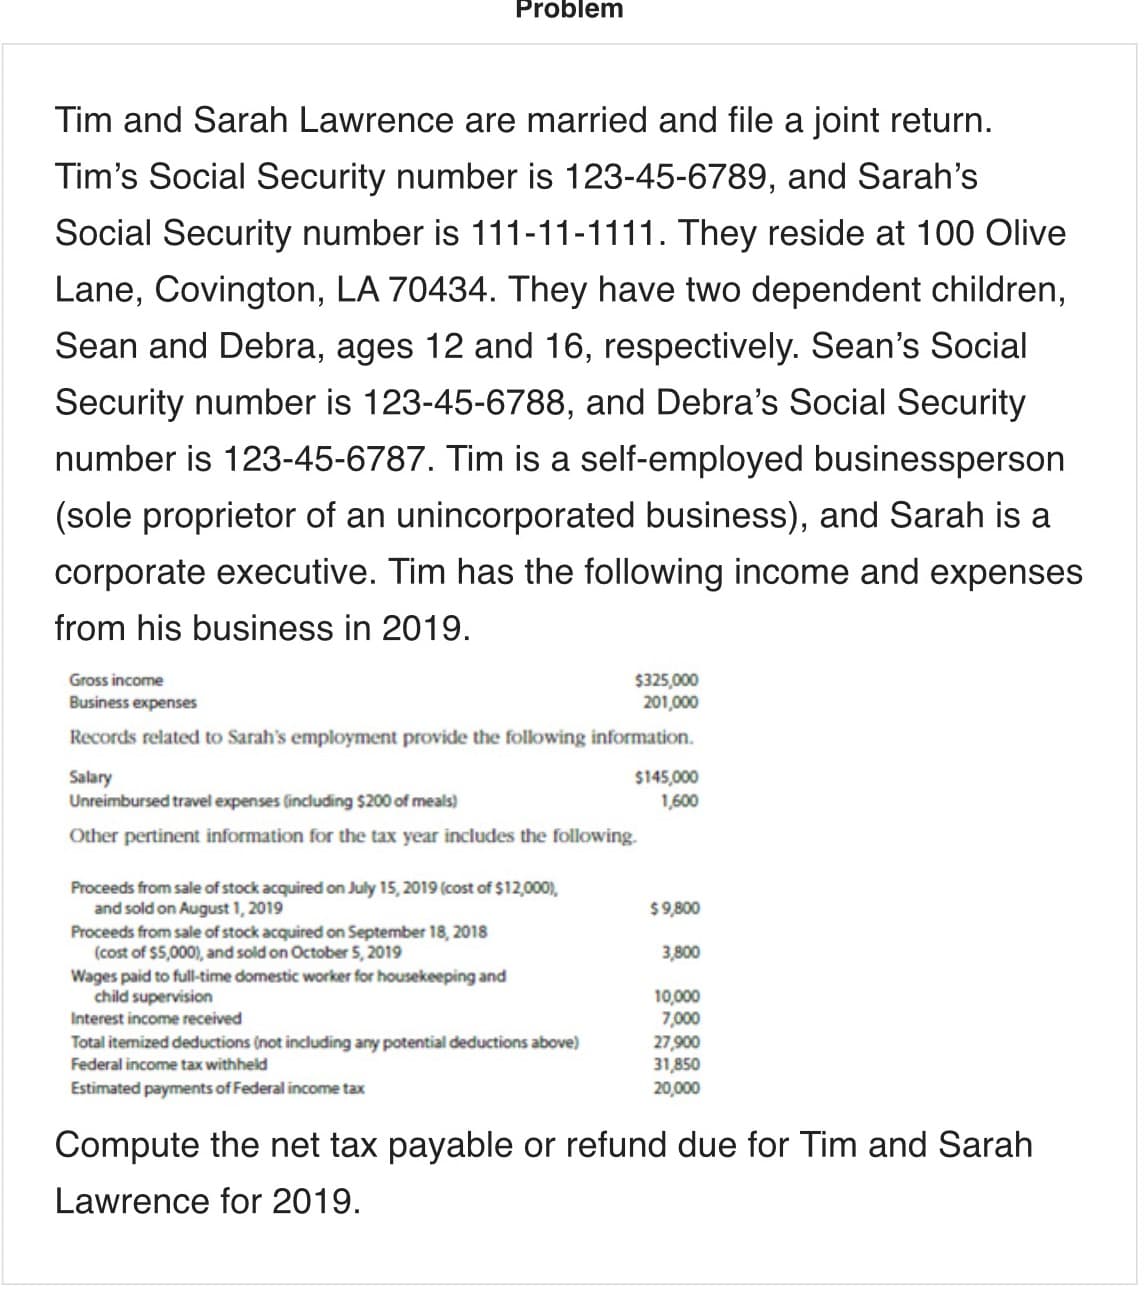 Problem
Tim and Sarah Lawrence are married and file a joint return.
Tim's Social Security number is 123-45-6789, and Sarah's
Social Security number is 111-11-1111. They reside at 100 Olive
Lane, Covington, LA 70434. They have two dependent children,
Sean and Debra, ages 12 and 16, respectively. Sean's Social
Security number is 123-45-6788, and Debra's Social Security
number is 123-45-6787. Tim is a self-employed businessperson
(sole proprietor of an unincorporated business), and Sarah is a
corporate executive. Tim has the following income and expenses
from his business in 2019.
$325,000
201,000
Gross income
Business expenses
Records related to Sarah's employment provide the following information.
Salary
Unreimbursed travel expenses (including $200 of meals)
$145,000
1,600
Other pertinent information for the tax year includes the following.
Proceeds from sale of stock acquired on July 15, 2019 (cost of $12,000),
and sold on August 1, 2019
Proceeds from sale of stock acquired on September 18, 2018
(cost of $5,000), and sold on October 5, 2019
Wages paid to full-time domestic worker for housekeeping and
child supervision
$9,800
3,800
10,000
7,000
27,900
31,850
20,000
Interest income received
Total itemized deductions (not including any potential deductions above)
Federal income tax withheld
Estimated payments of Federal income tax
Compute the net tax payable or refund due for Tim and Sarah
Lawrence for 2019.
